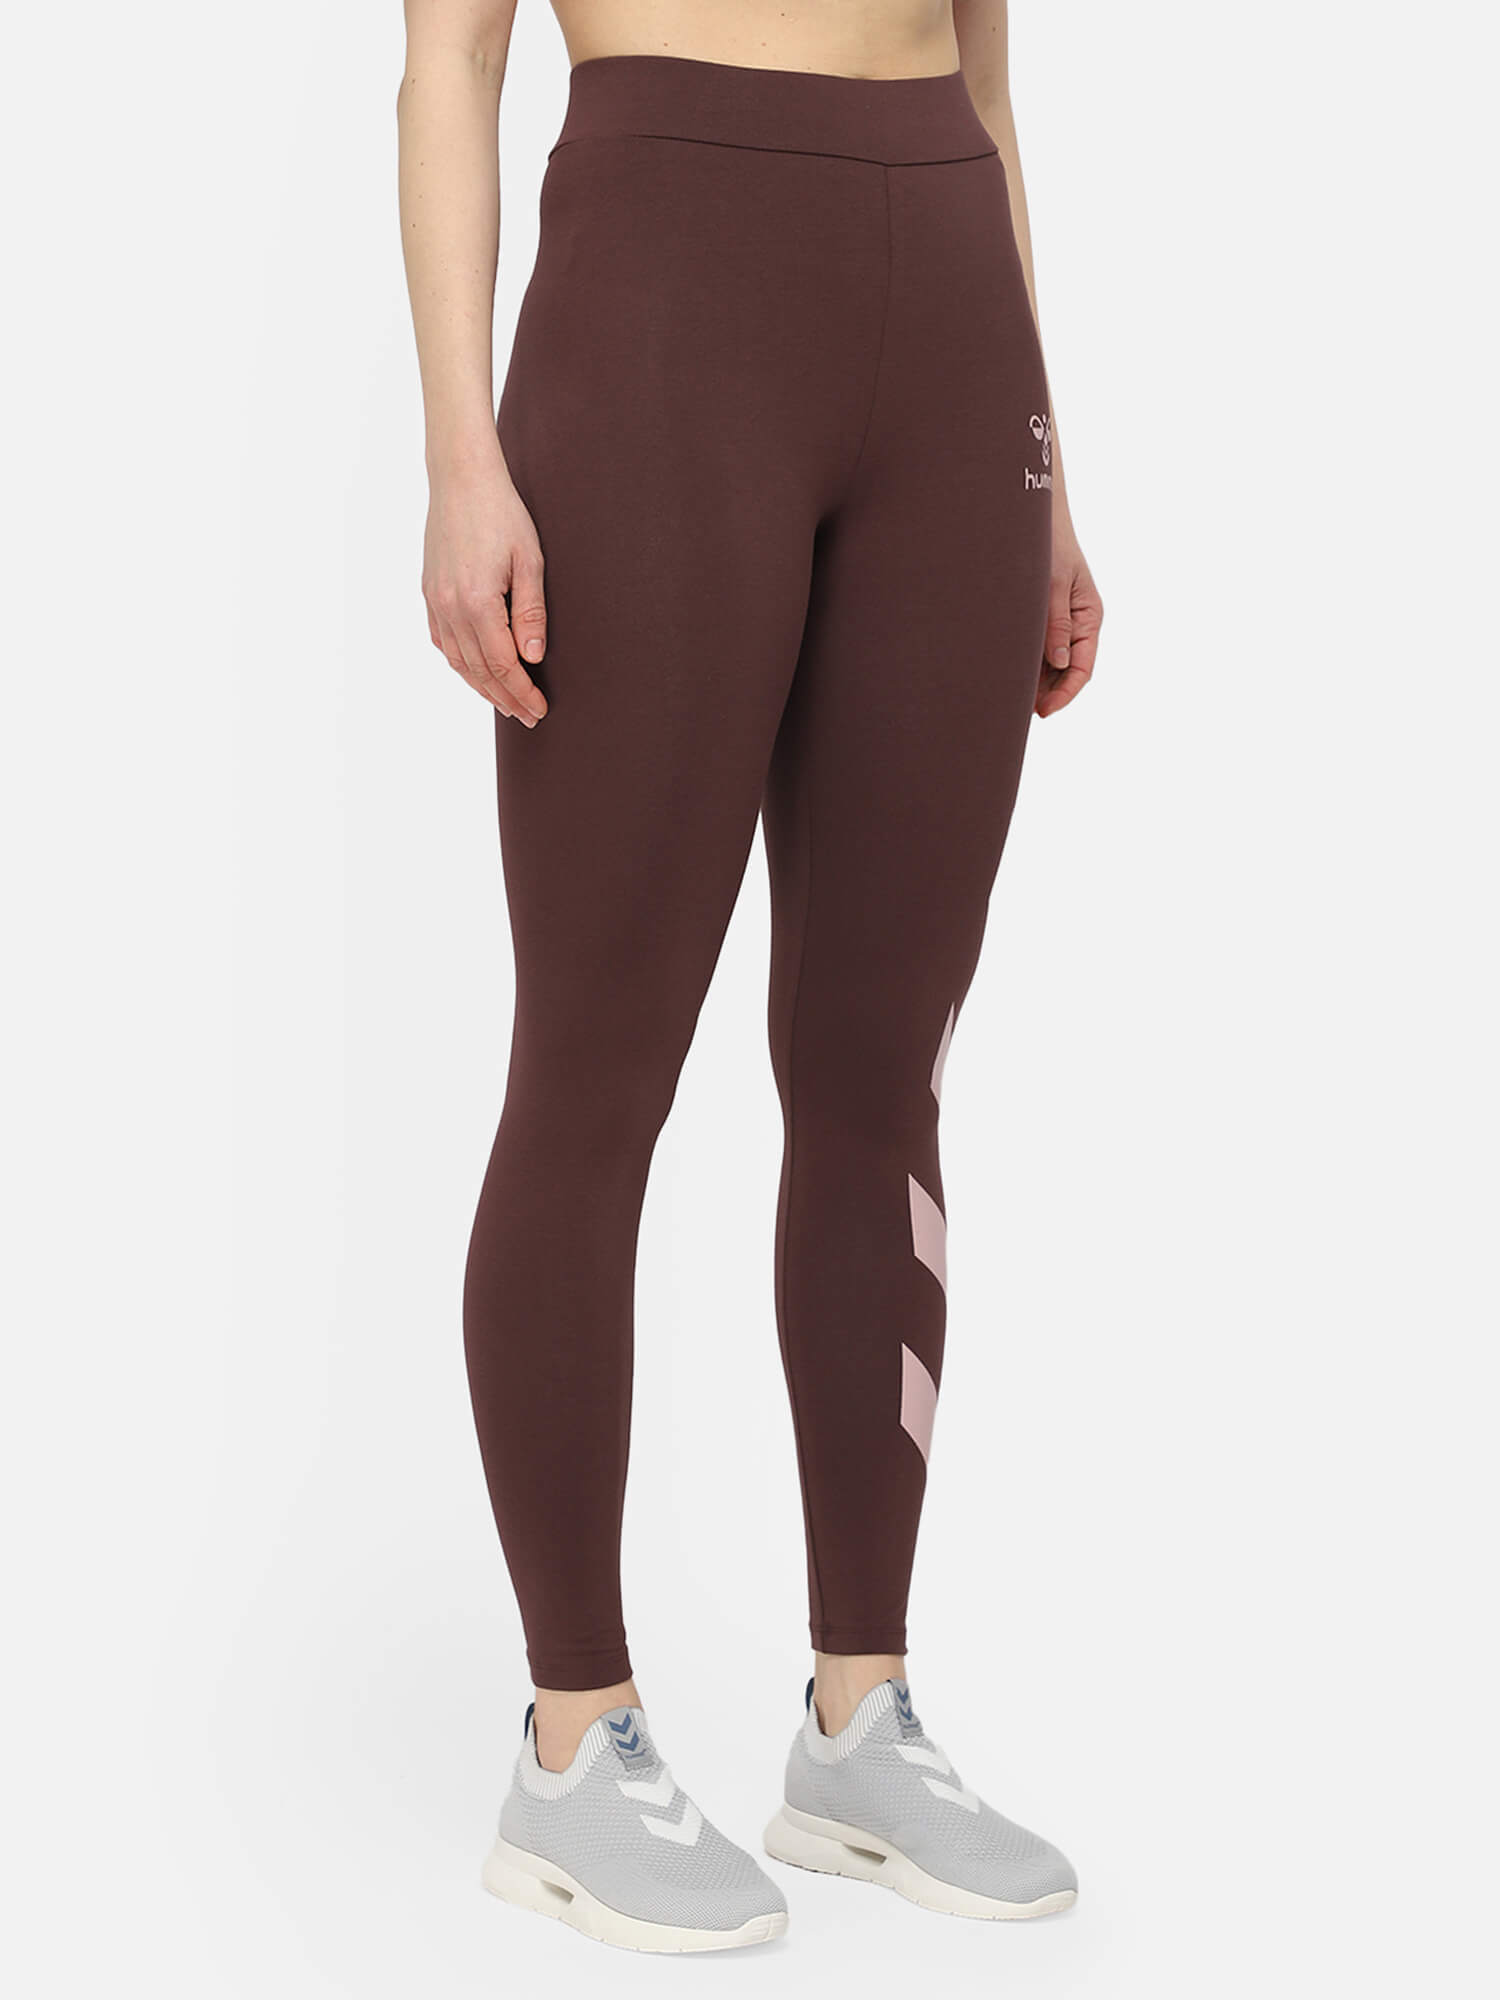 Sommer Brown Tights for Women